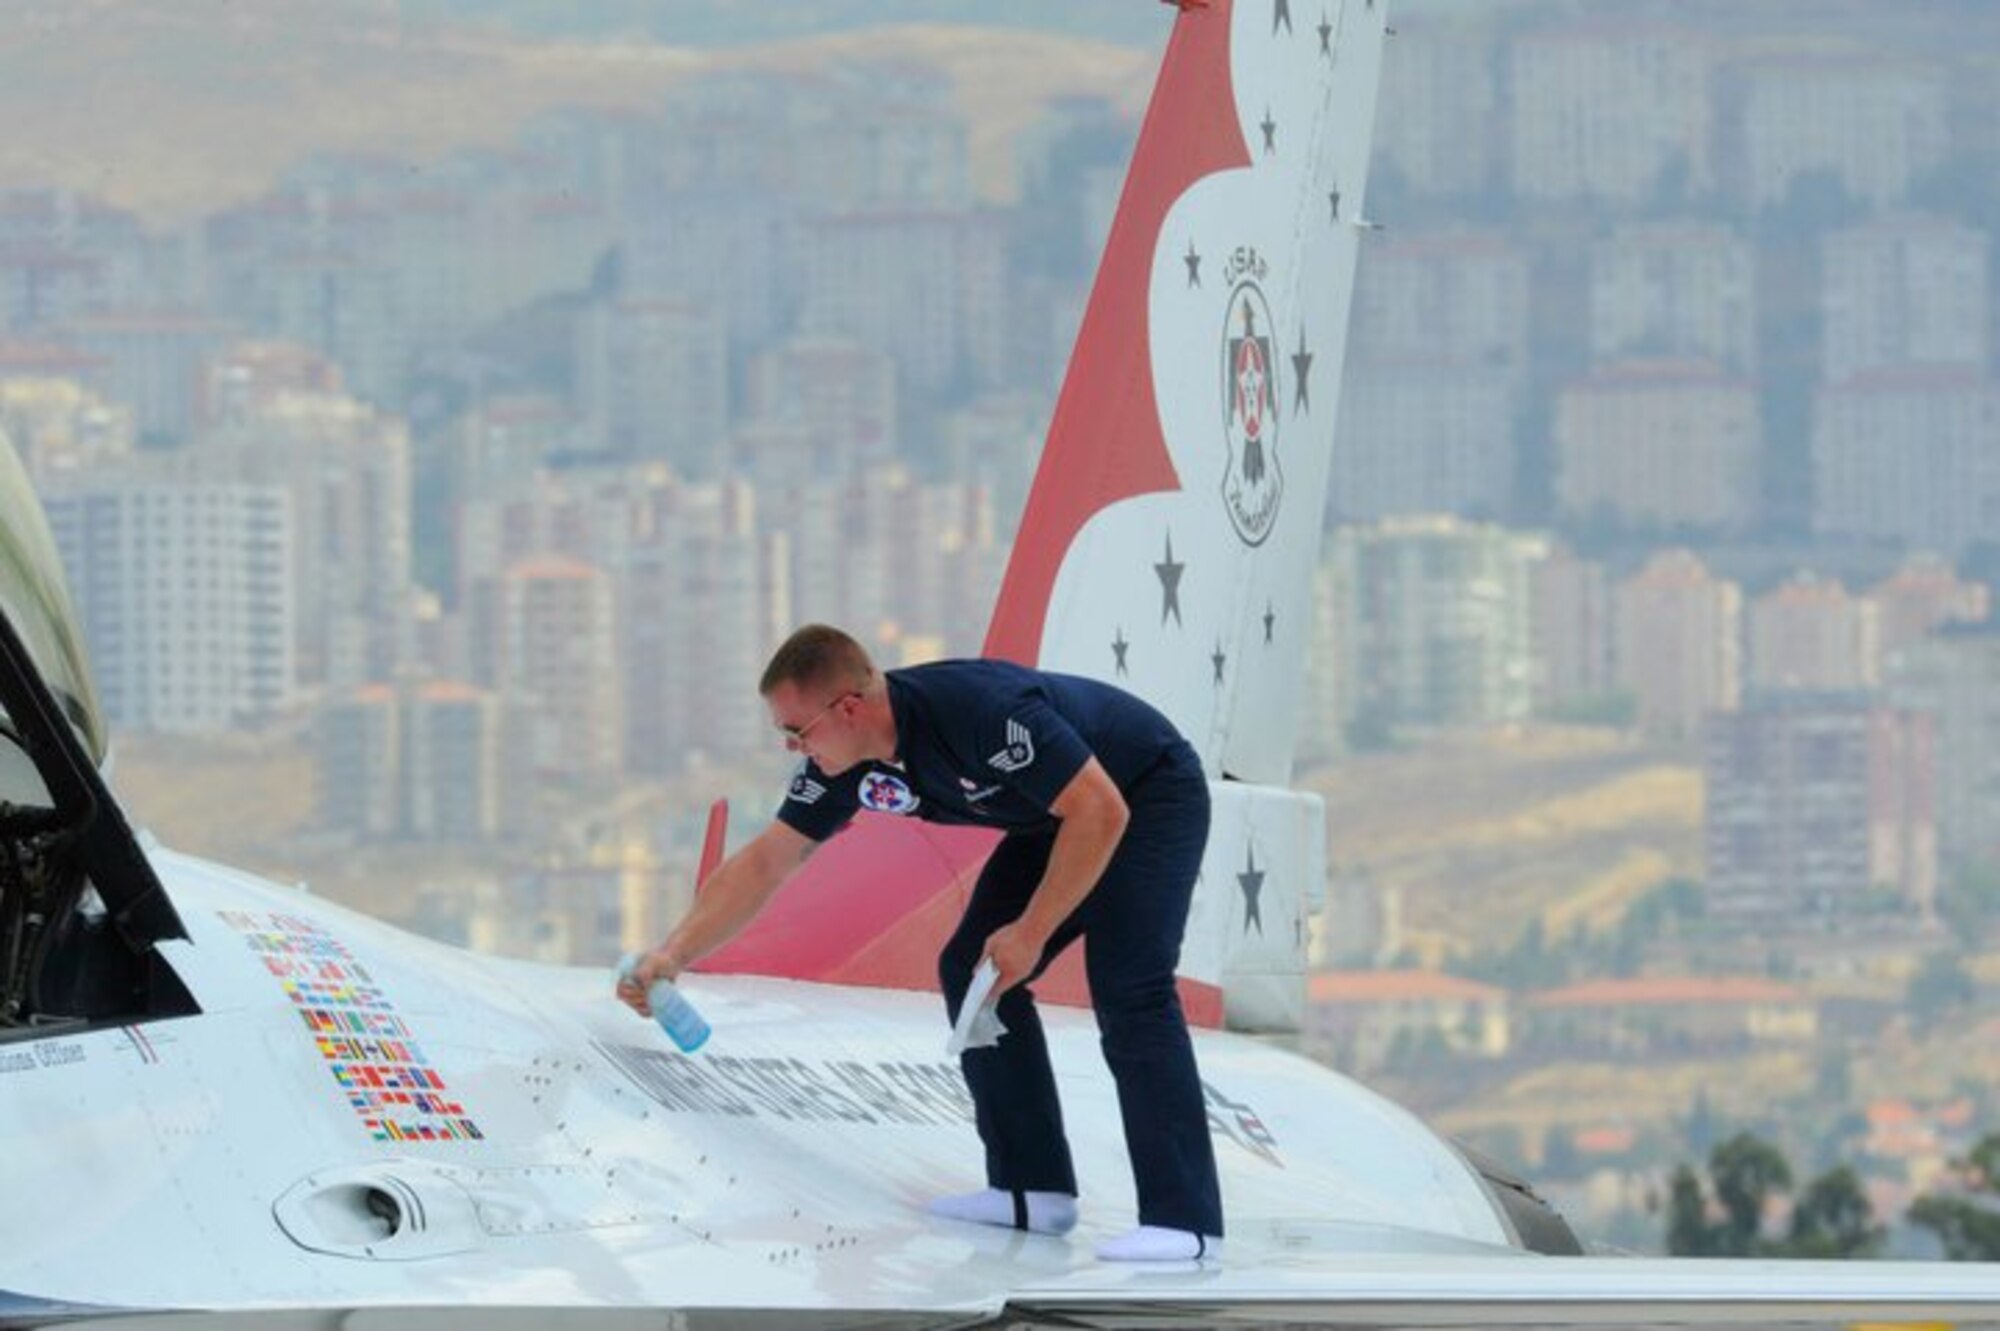 Staff Sgt. Randy Hassenplug, assistant crew chief for Thunderbird No. 7, cleans his jet June 2, 2011, before the Thunderbirds' practice demonstration at Ciigli Air Base, Turkey. (U.S. Air Force photo/Staff Sgt. Richard Rose Jr.)